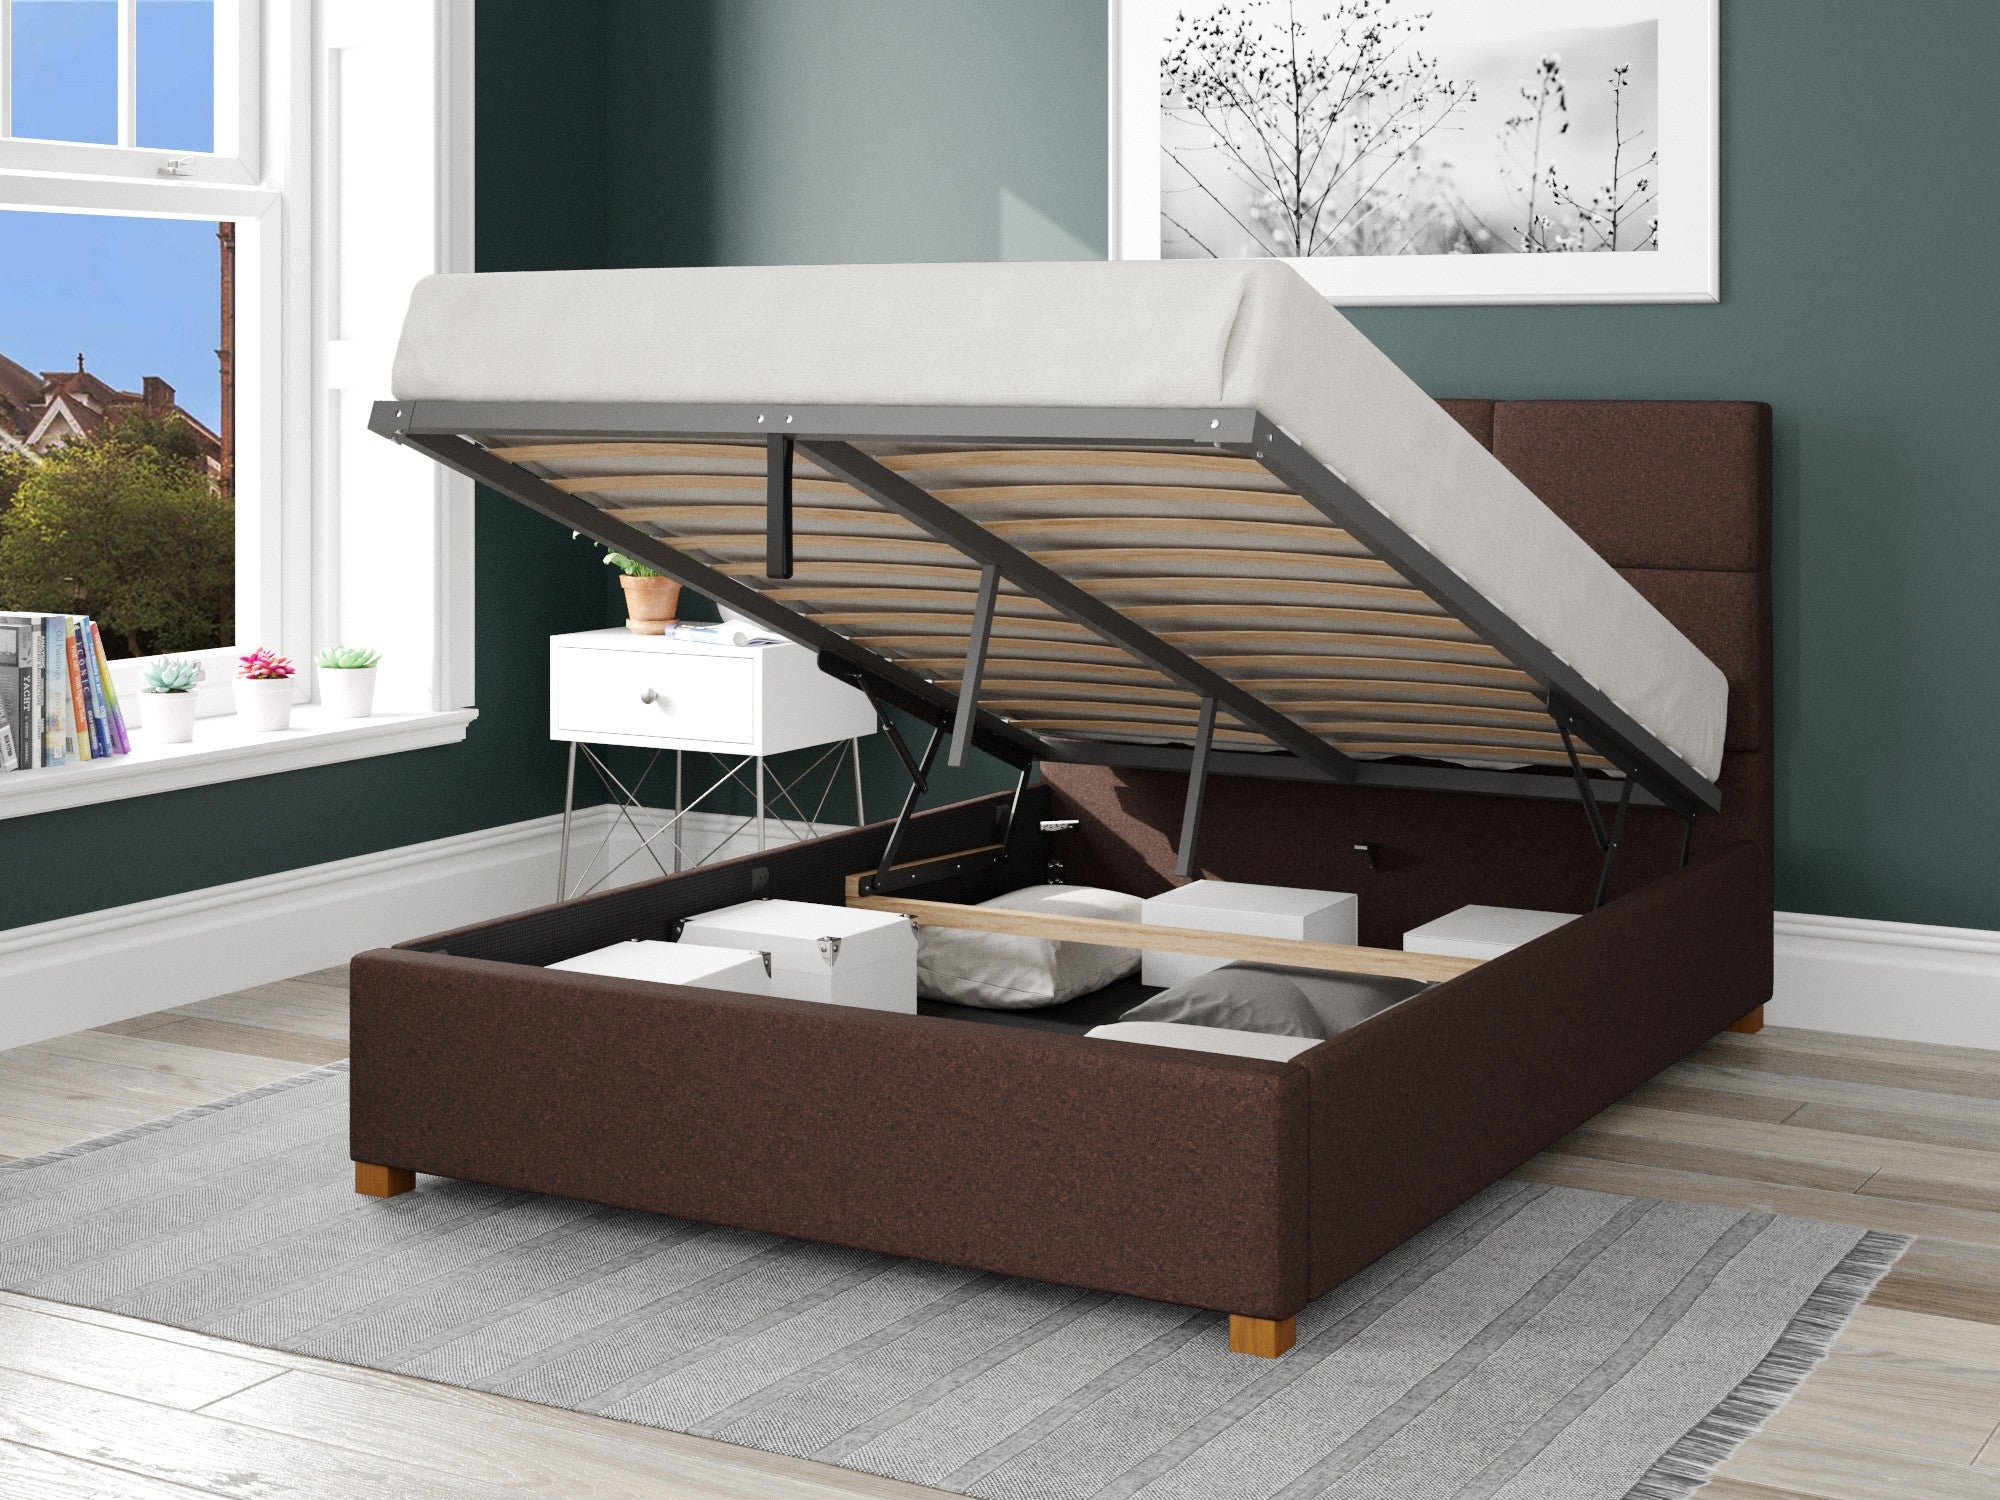 Caine Fabric Ottoman Bed - Yorkshire Knit - Chocolate